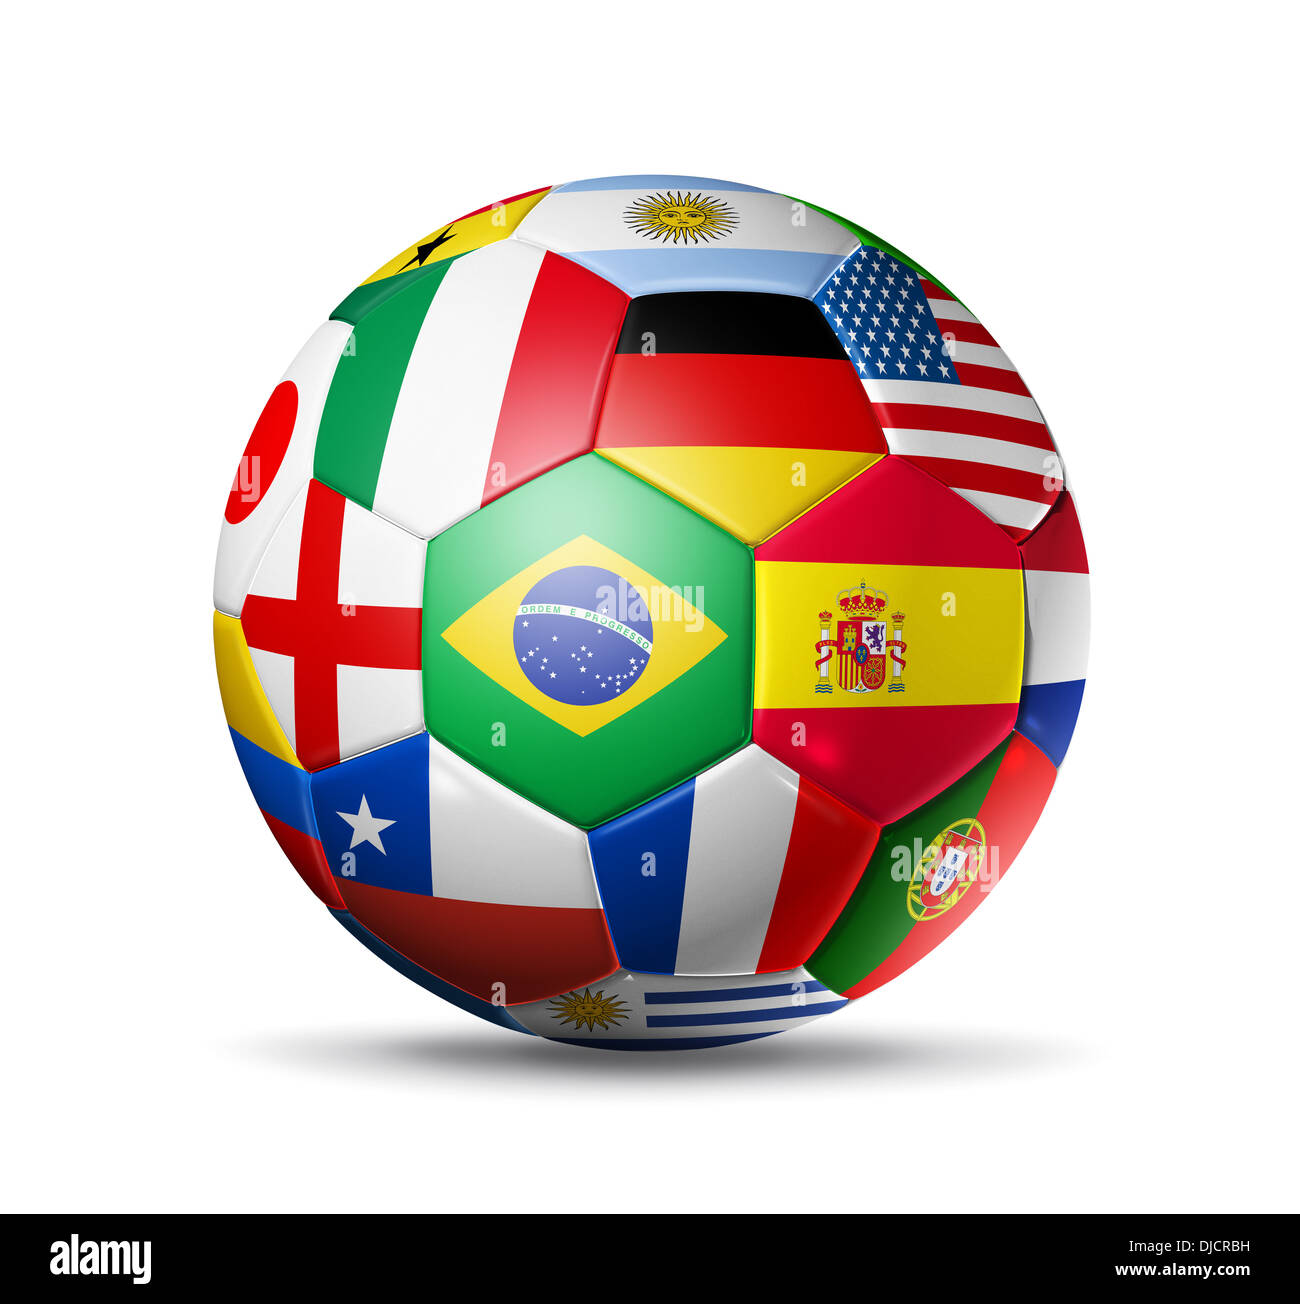 3D football soccer ball with world teams flags. brazil world cup 2014. Isolated on white Stock Photo